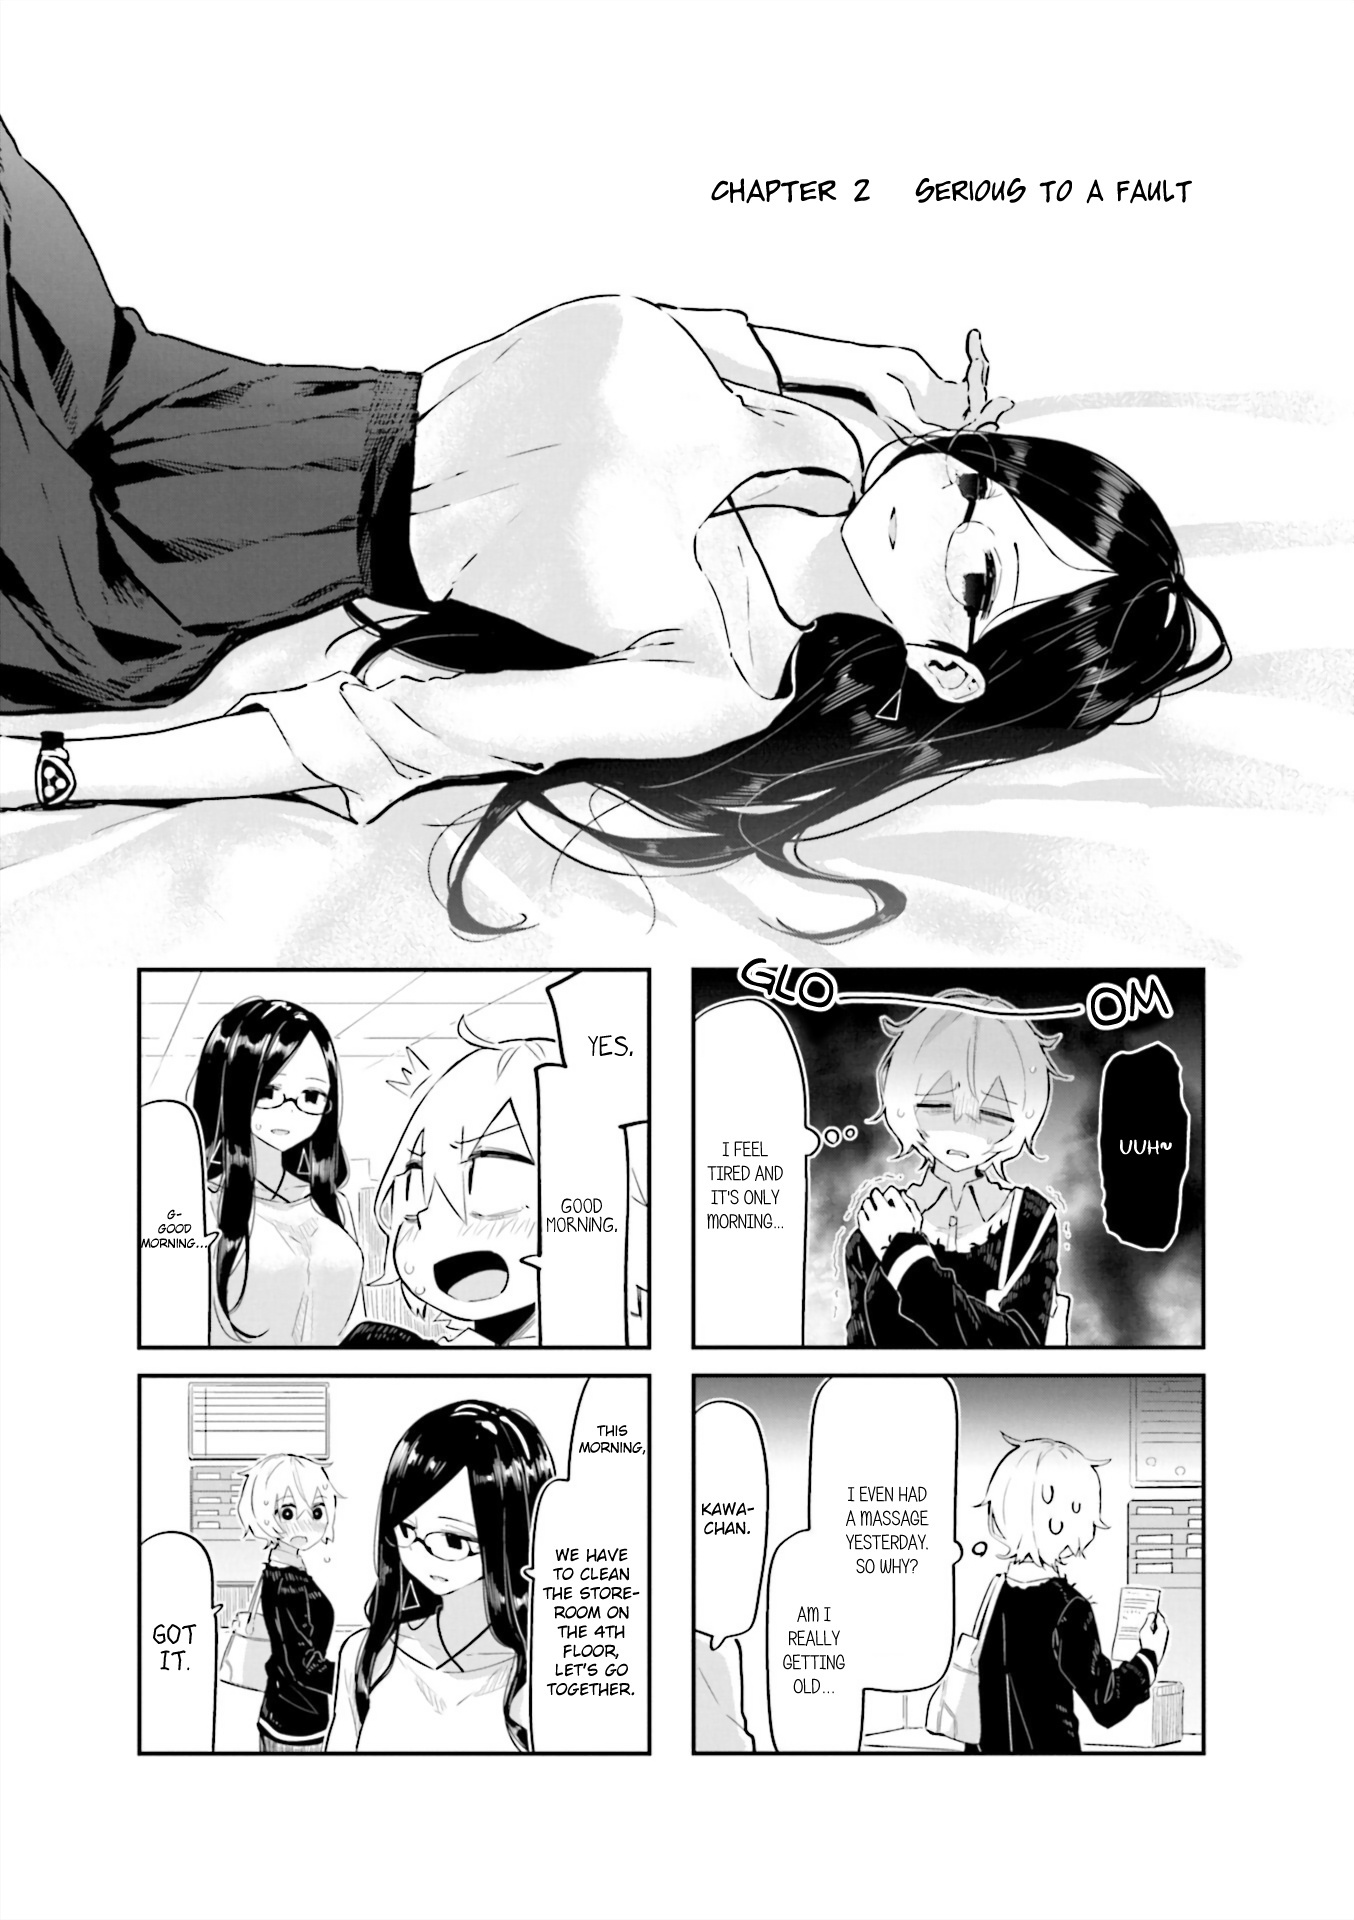 Hogushite, Yui-San Vol.1 Chapter 2: Serious To A Fault - Picture 1